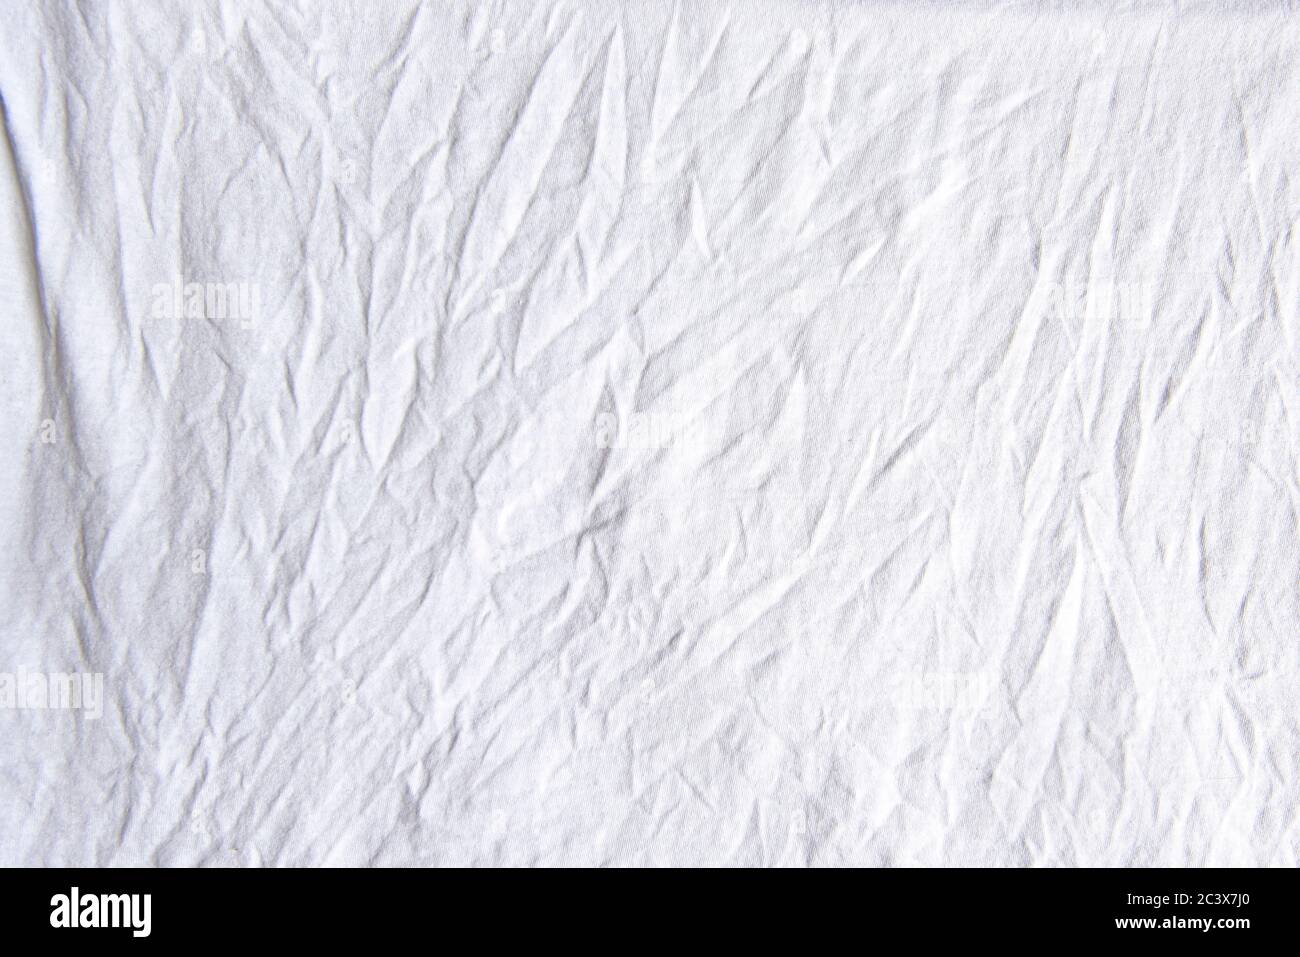 Wrinkled crumpled white cloth, background or texture Stock Photo - Alamy